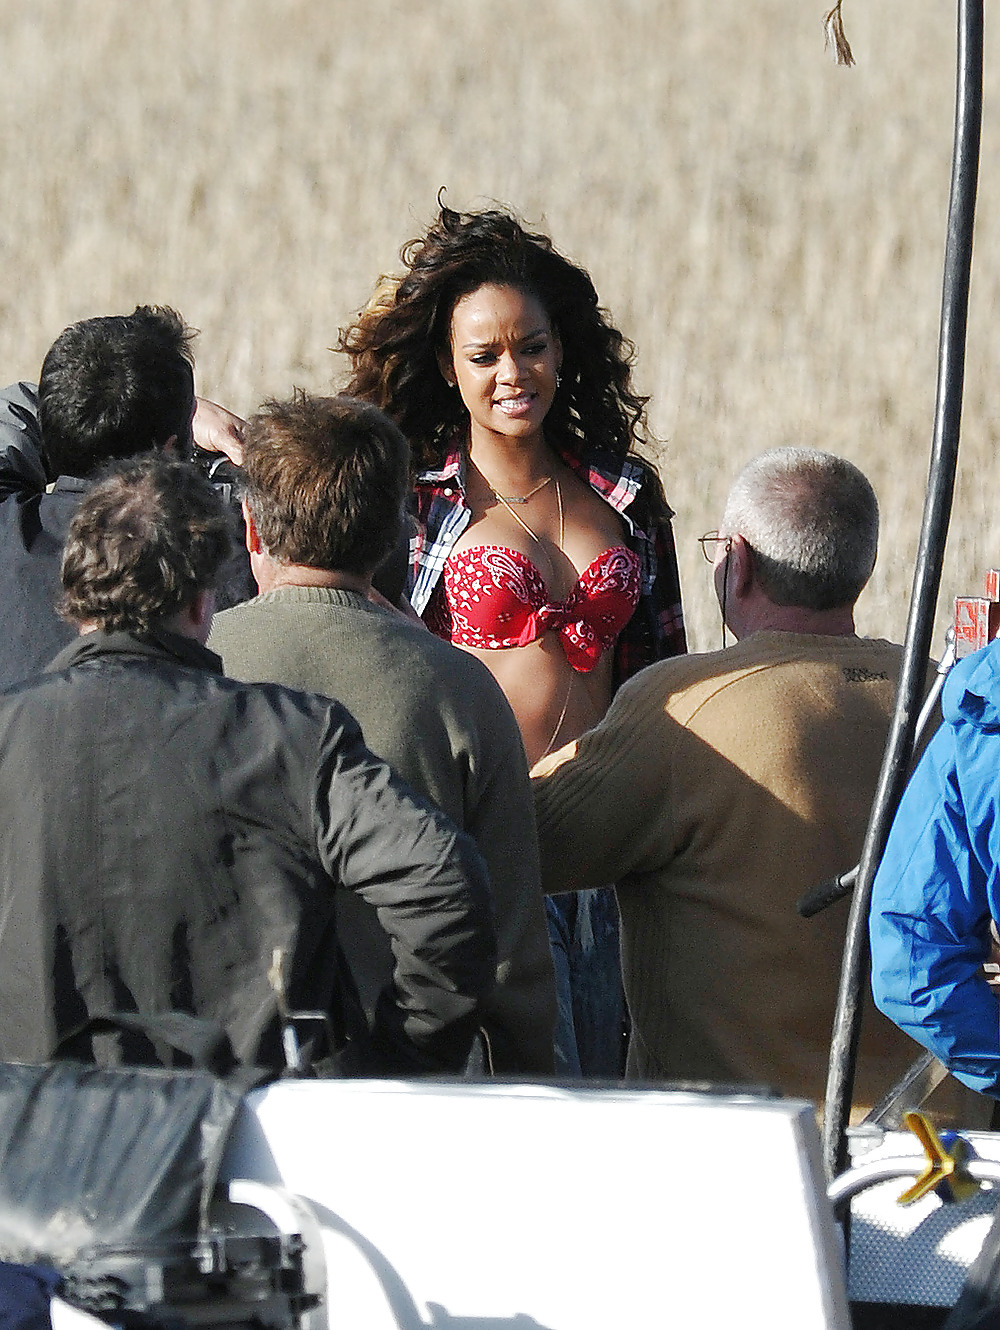 Rihanna - sexy while filming a music video in Ireland #7527137